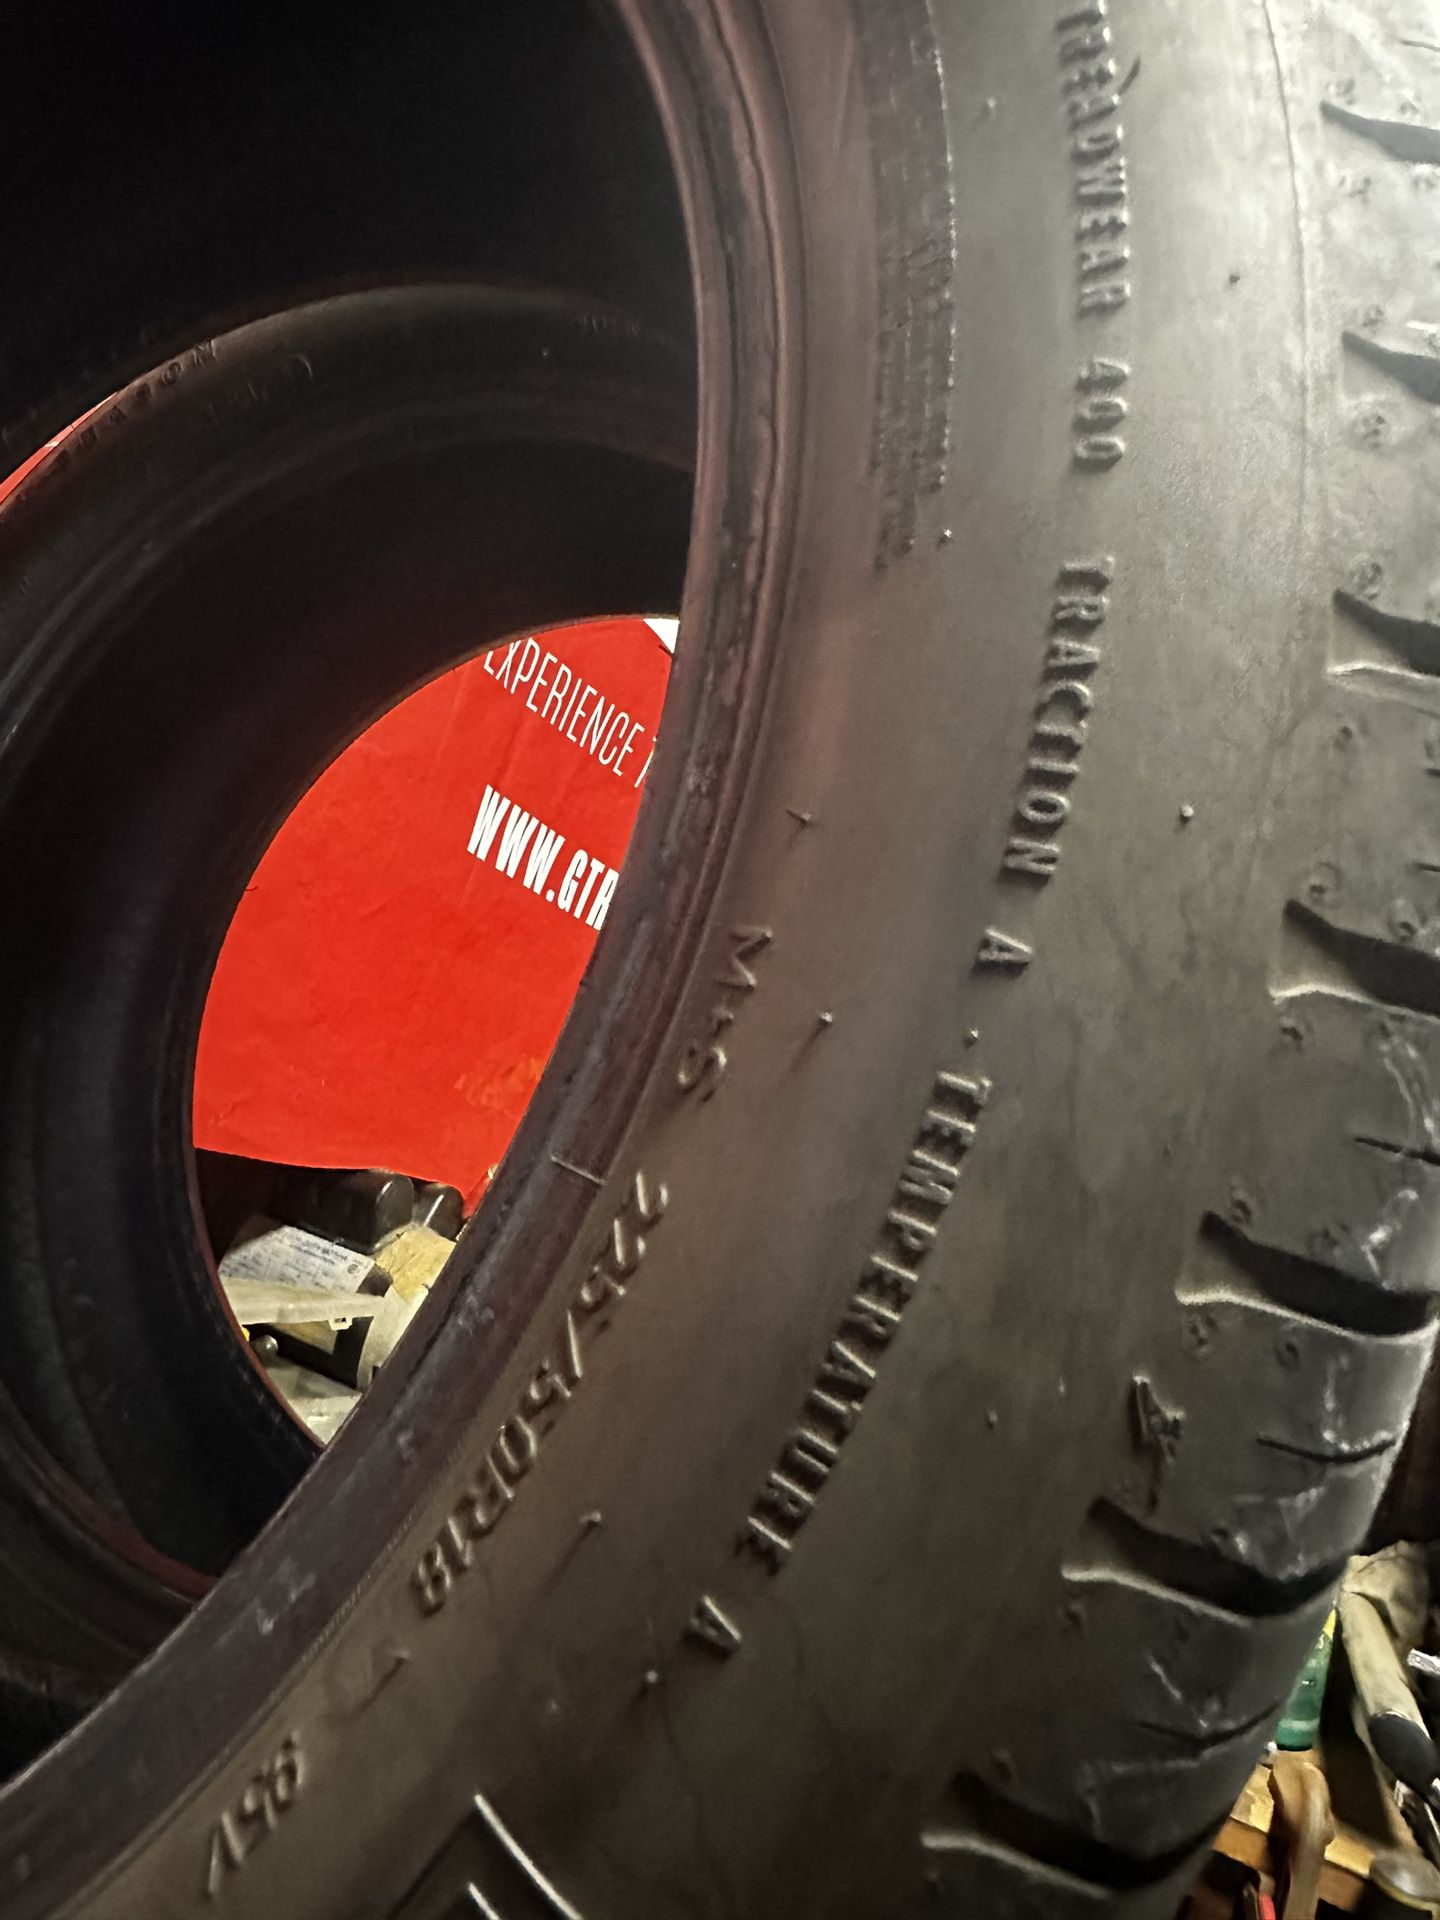 Goodyear Tires 225/50 R 18 Excellent Condition Two Tires For $80